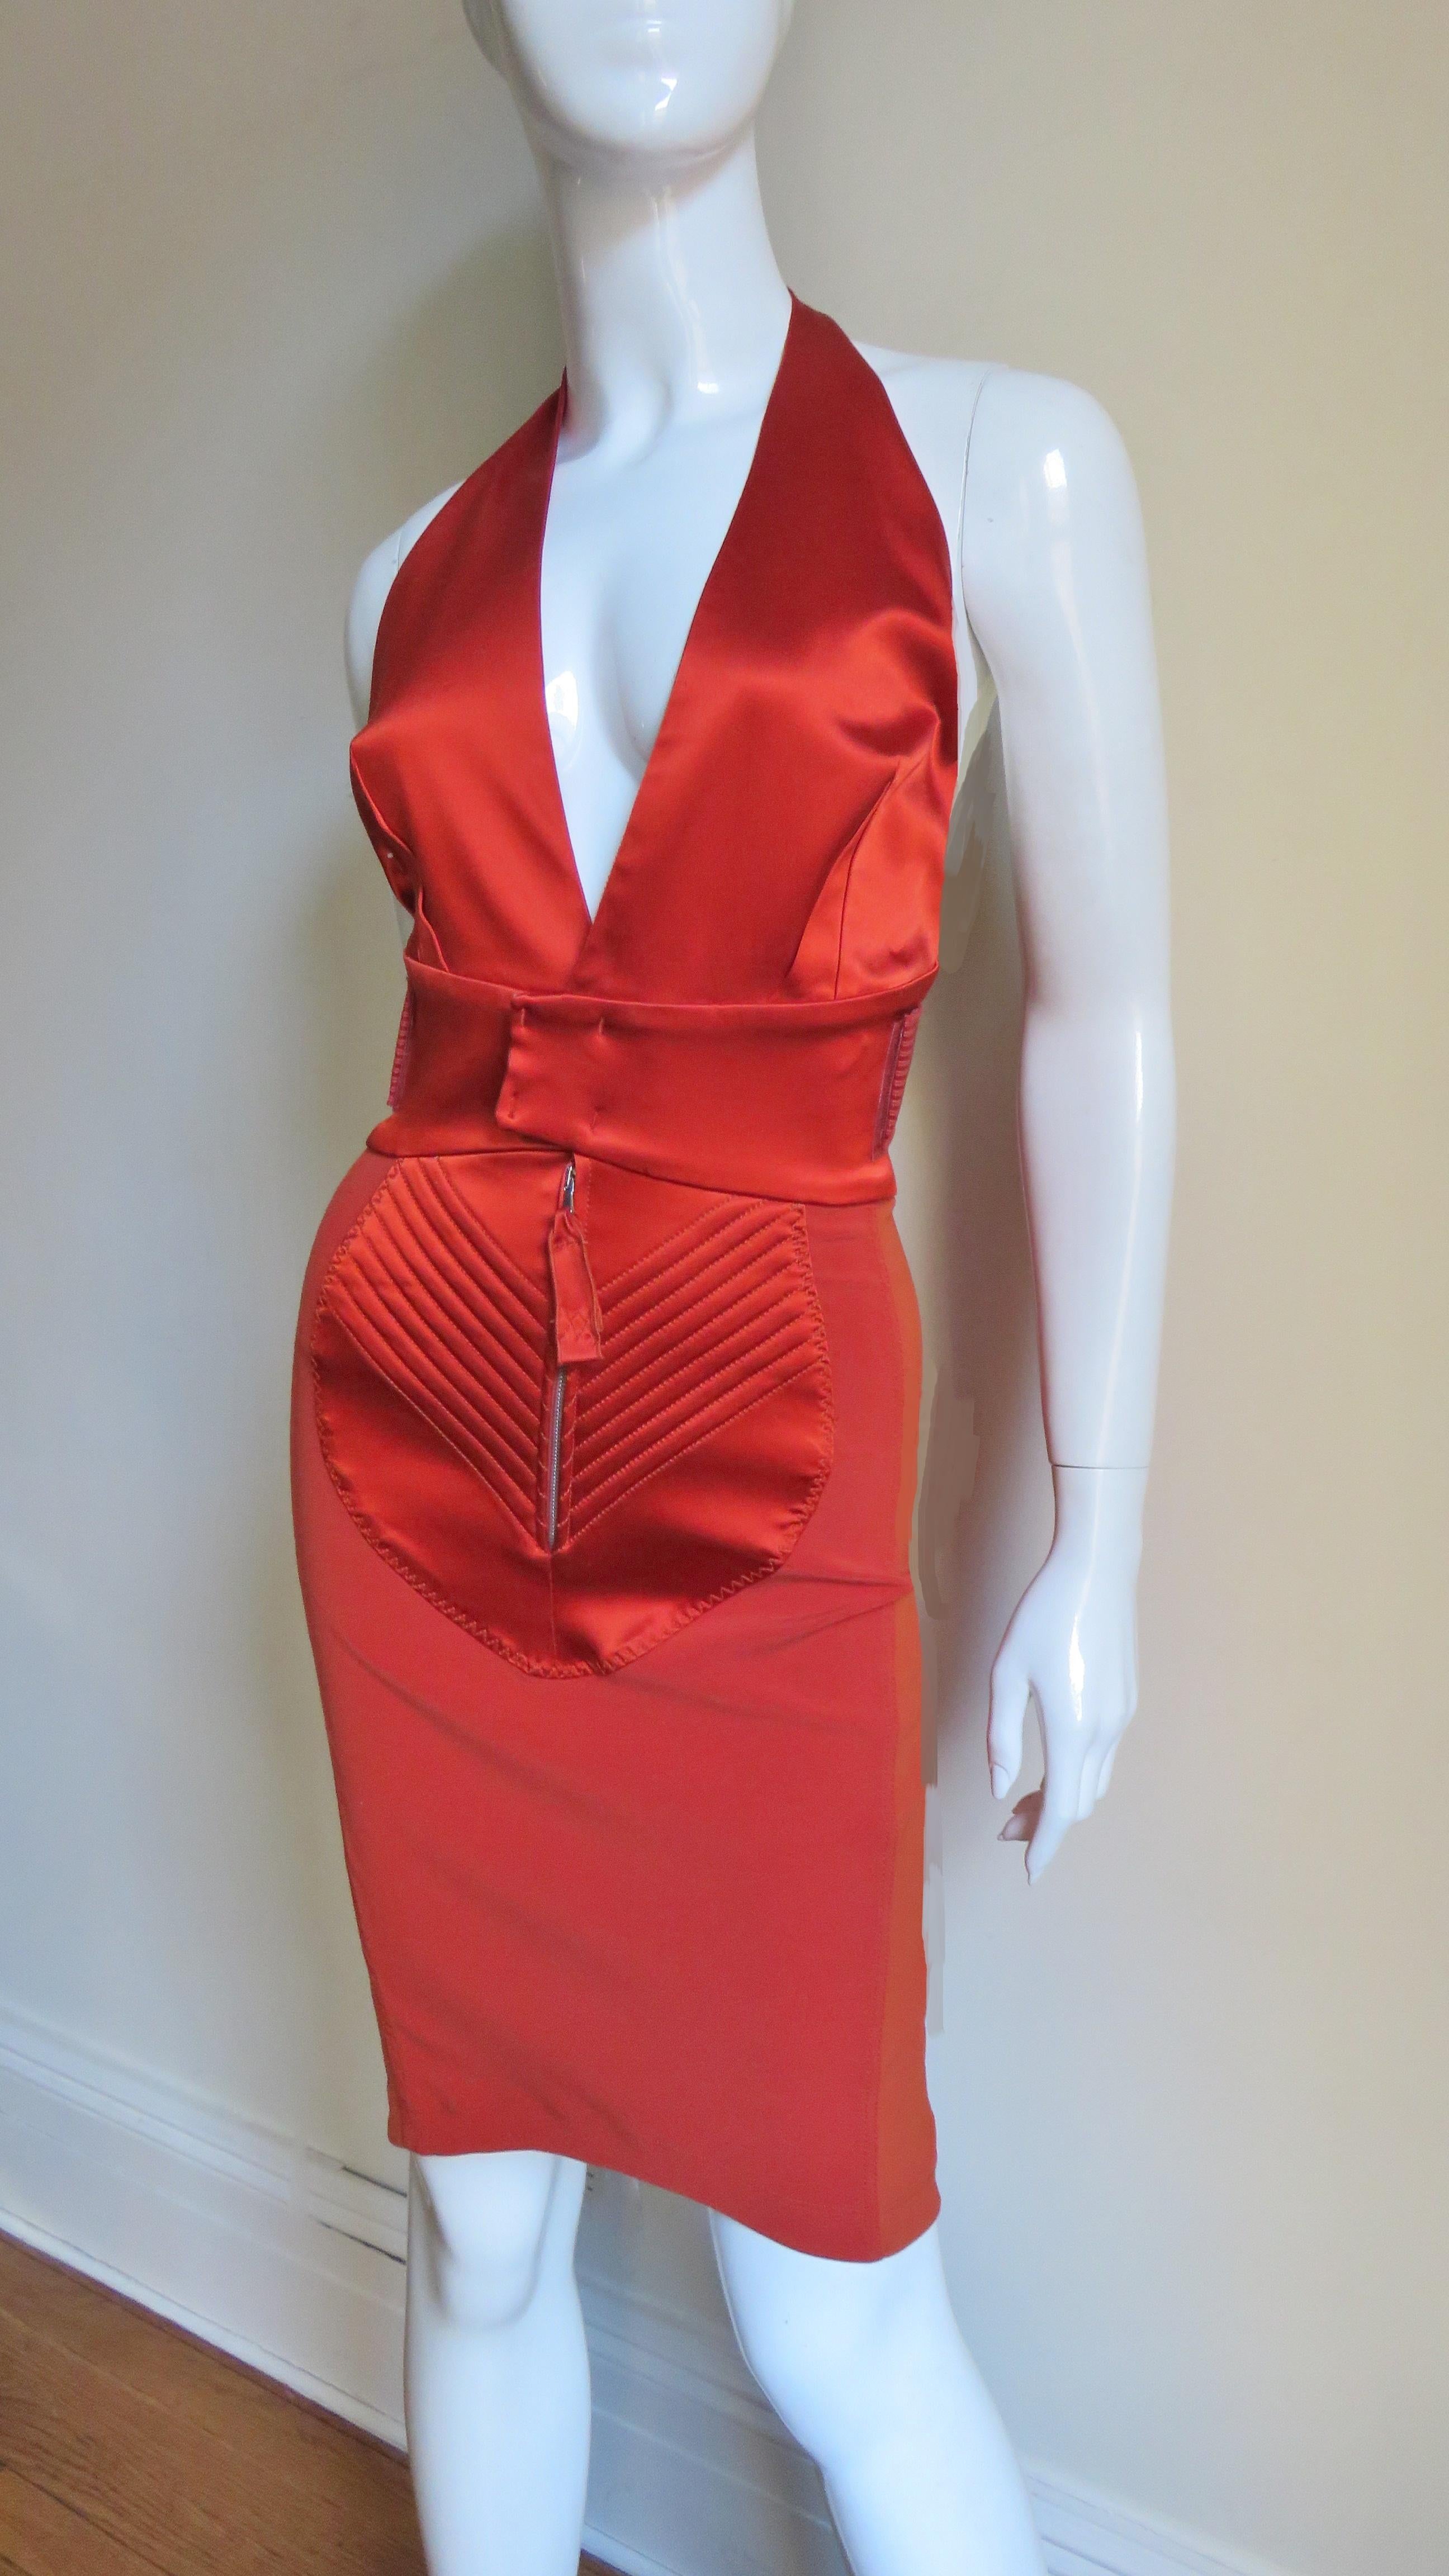 This is a fabulous tangerine stretch satin dress from Jean Paul Gaultier very rich in detail.  It has a plunging halter neckline with interwoven stretch bands at the back waist that cross through an oval matching leather vertical panel.   The skirt